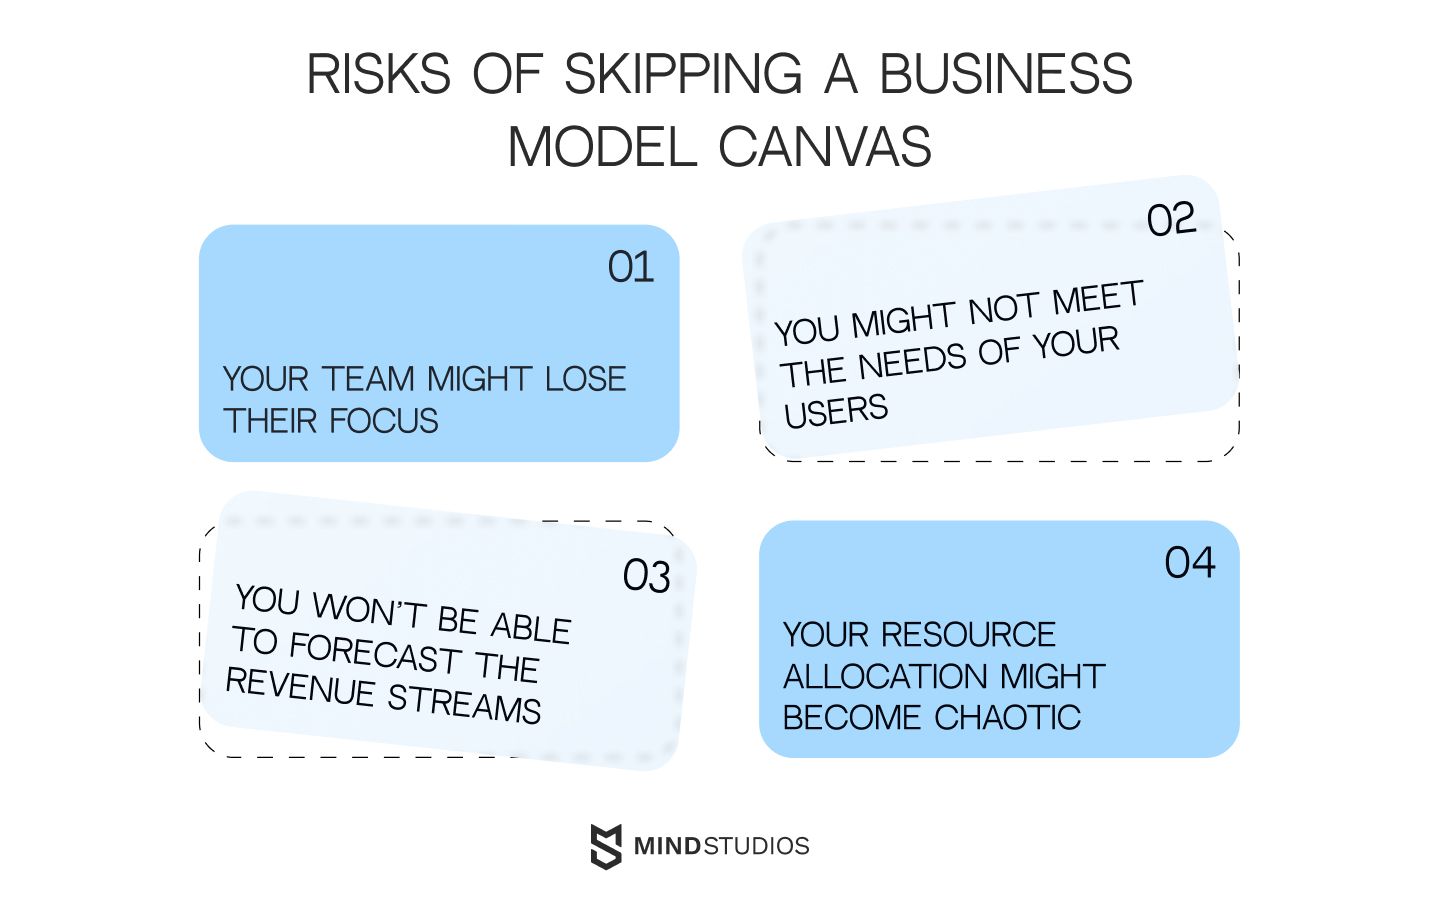 Risks of skipping a business model canvas